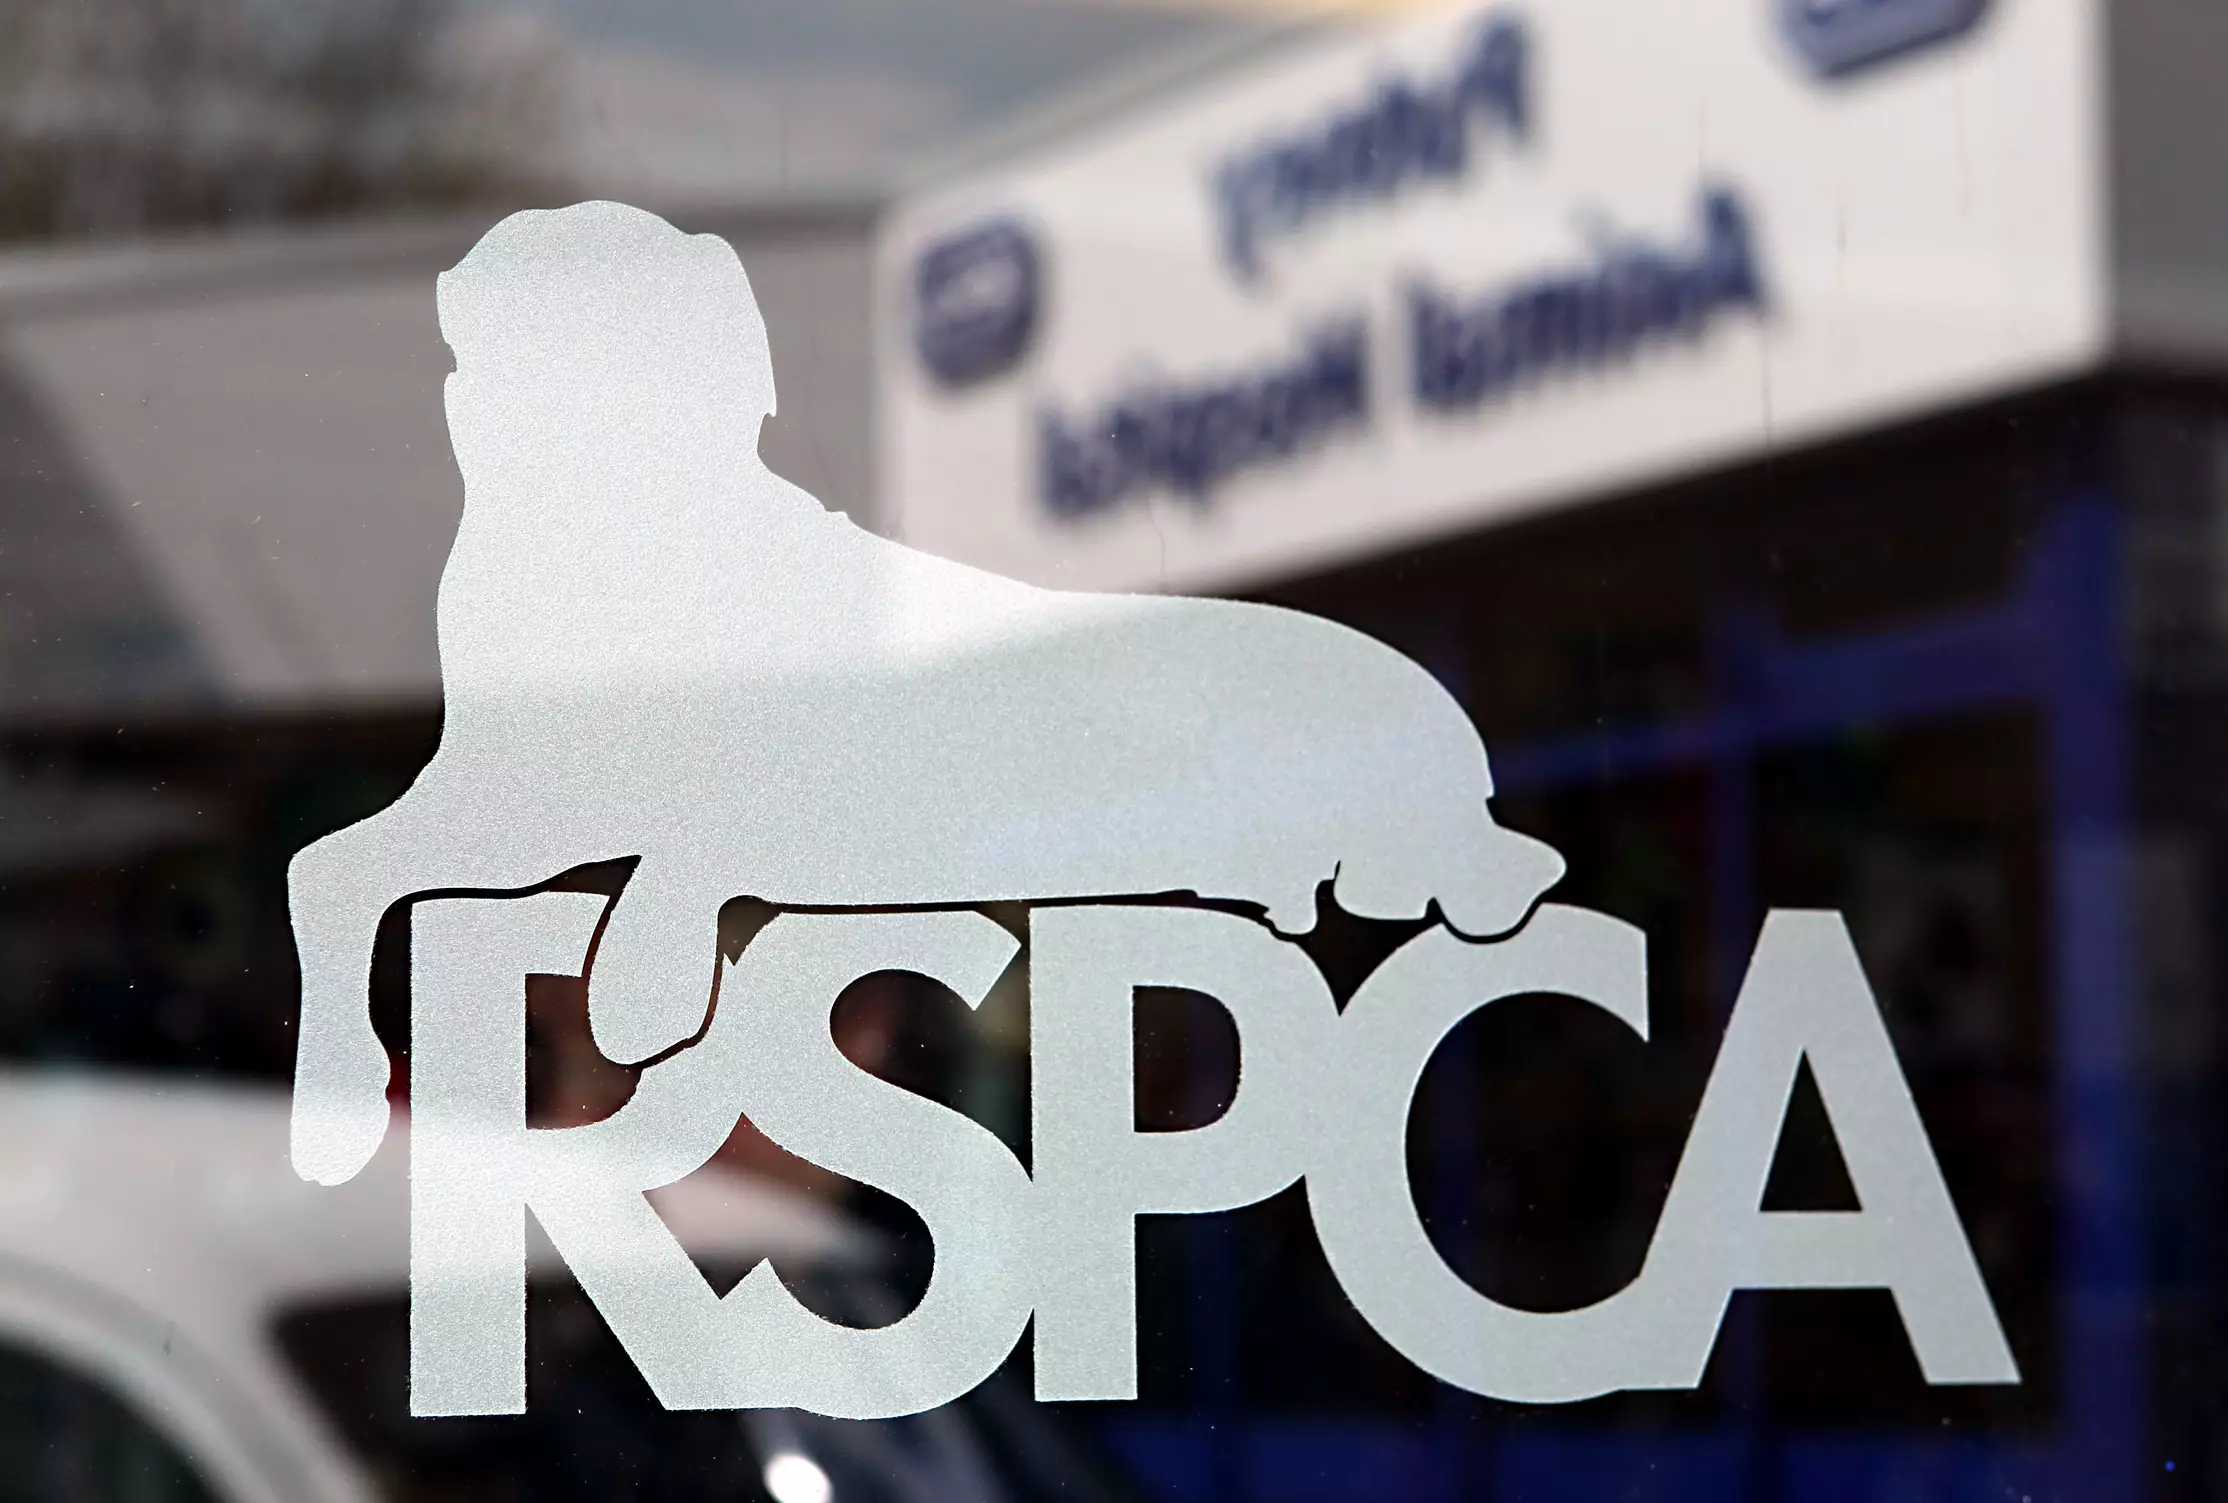 Joshua was prosecuted by the RSPCA (